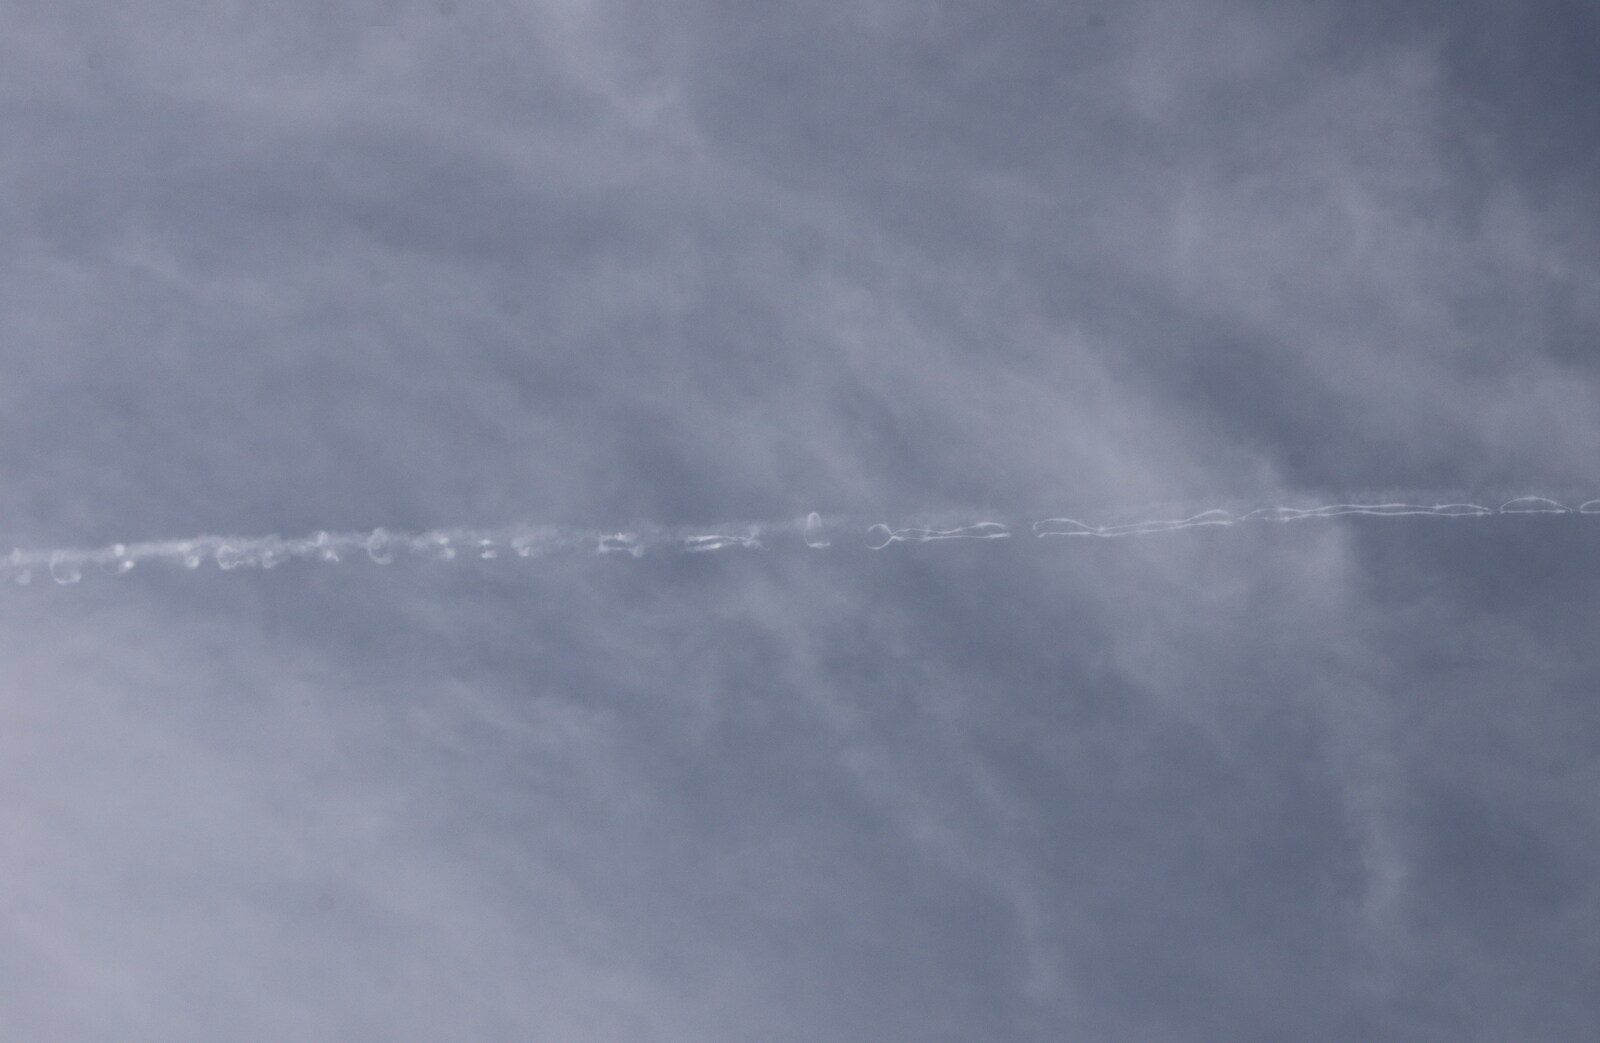 There's an unusual aircraft contrail overhead from A Winter's Walk, Thrandeston, Suffolk - 5th February 2017